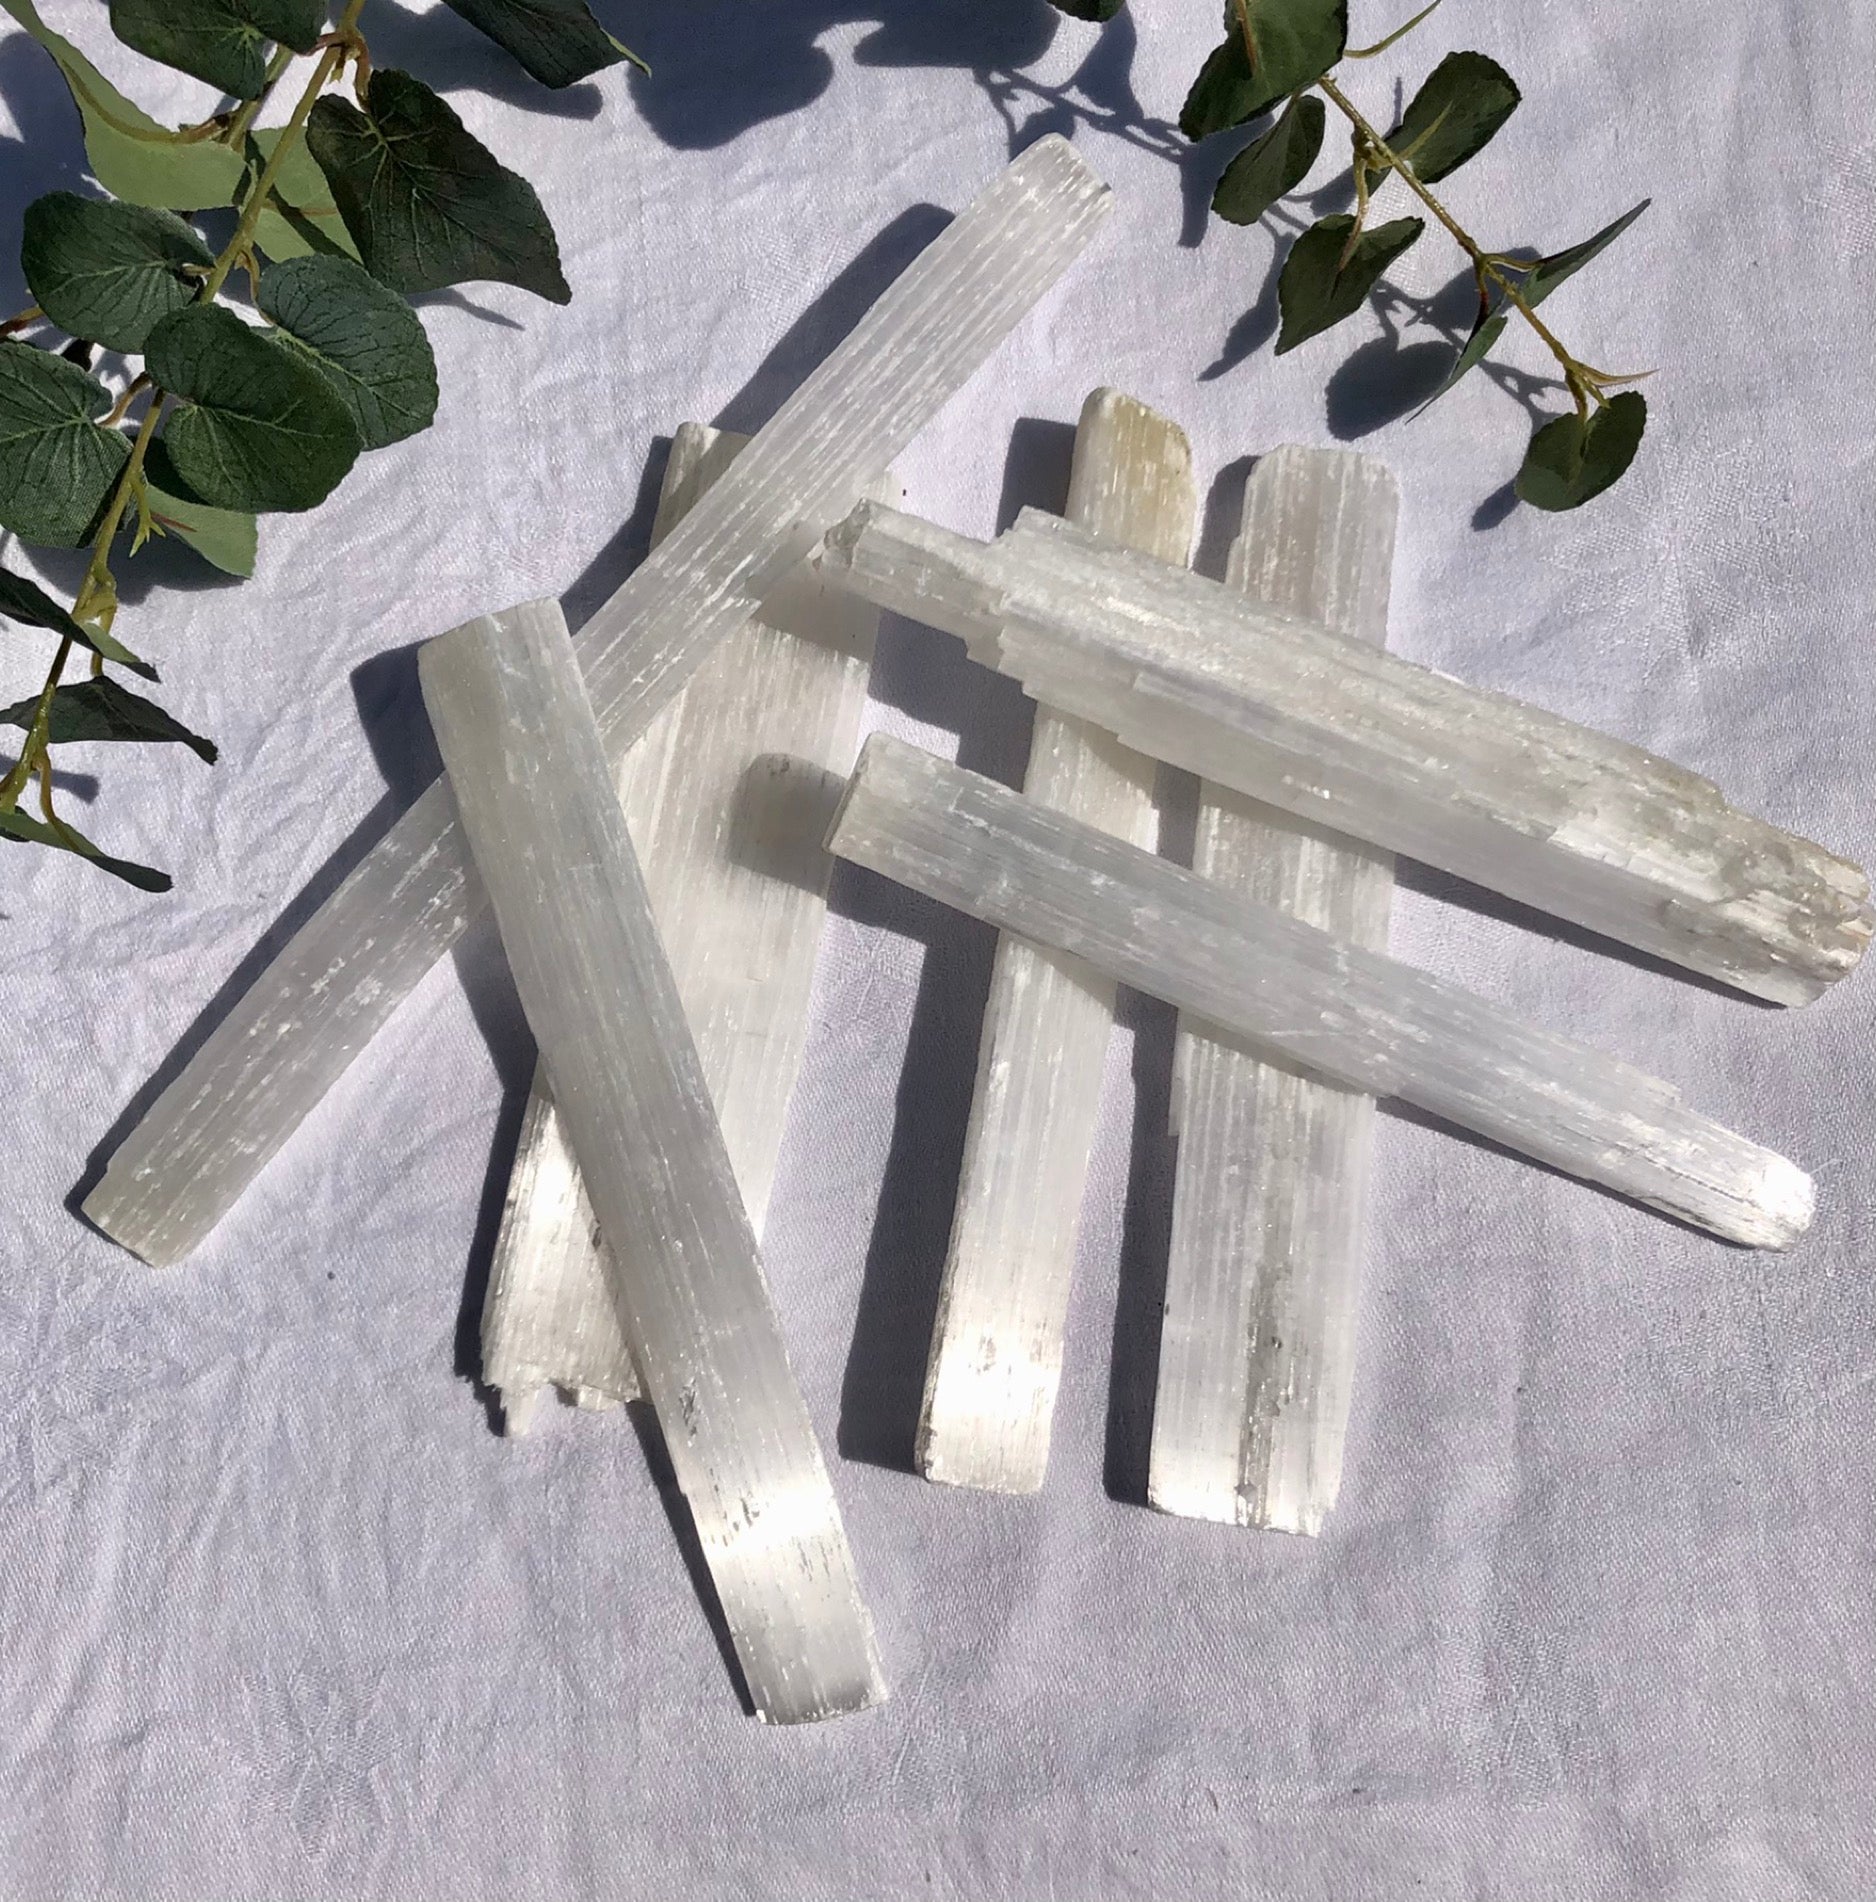 Several selenite rods stacked upon each other glistening in the sun